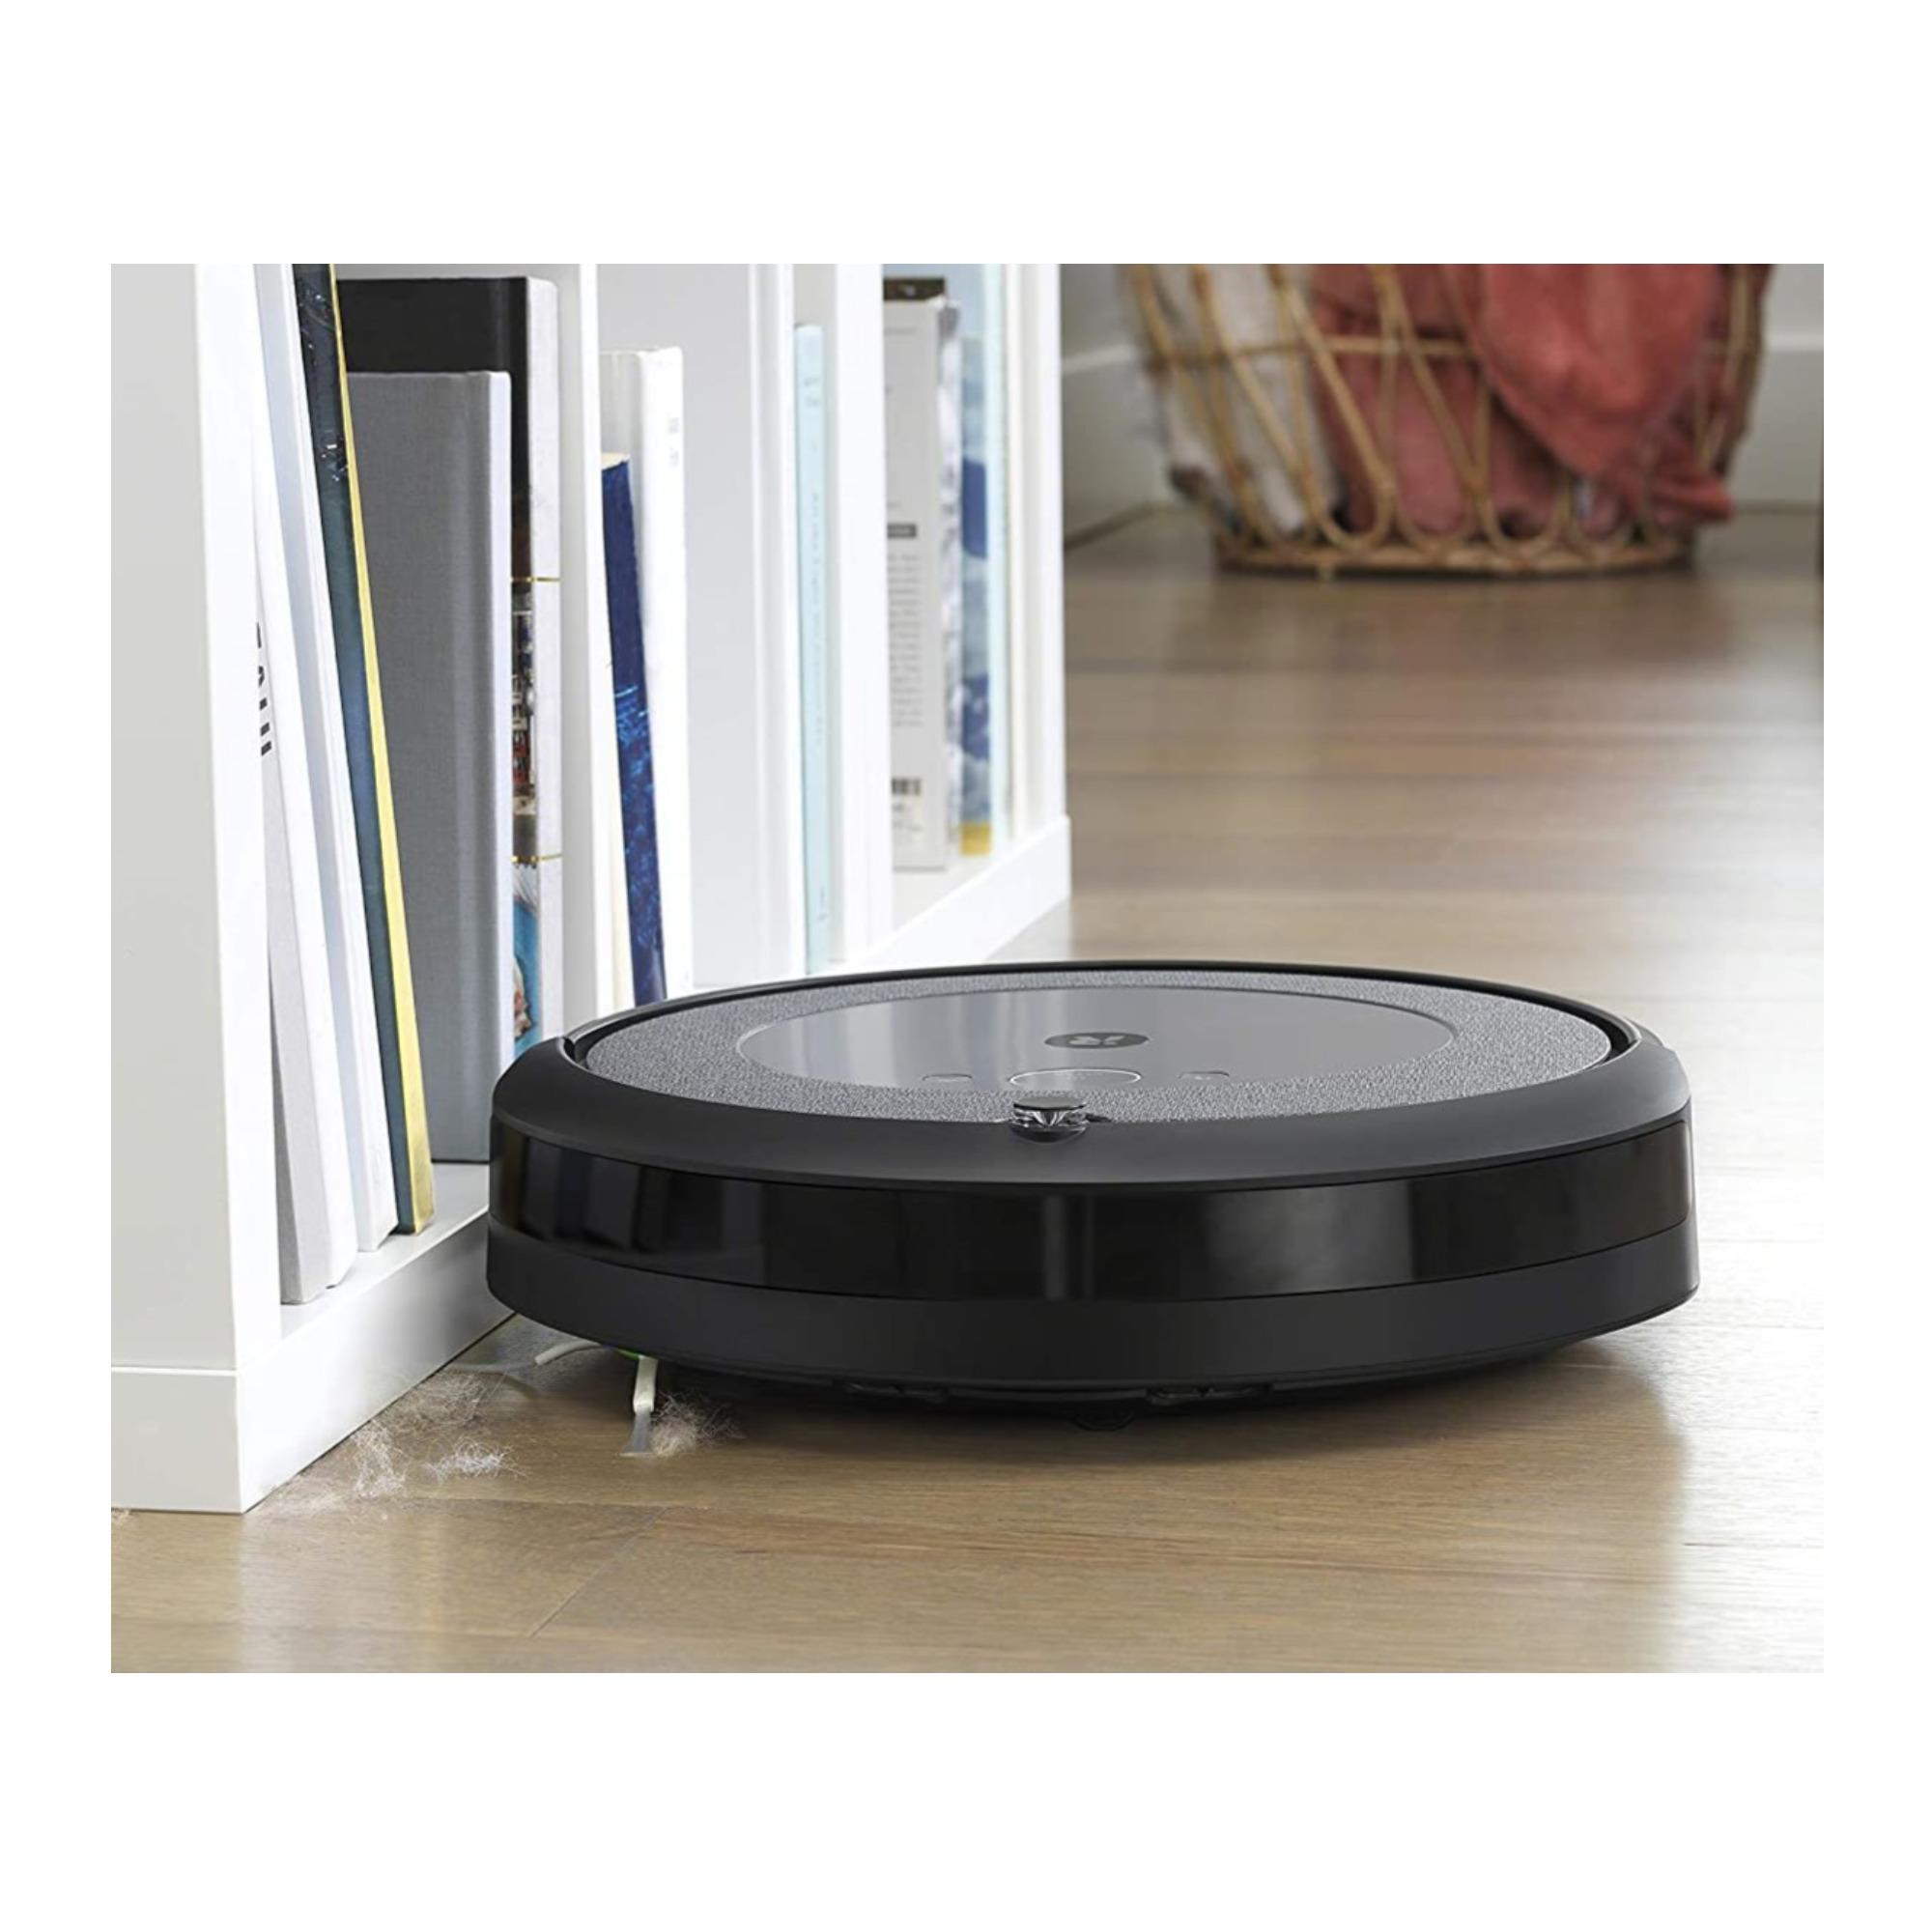 iRobot Roomba i3+ (3550) Wi-Fi Connected Robot Vacuum with Virtual Wall Barrier - image 5 of 5